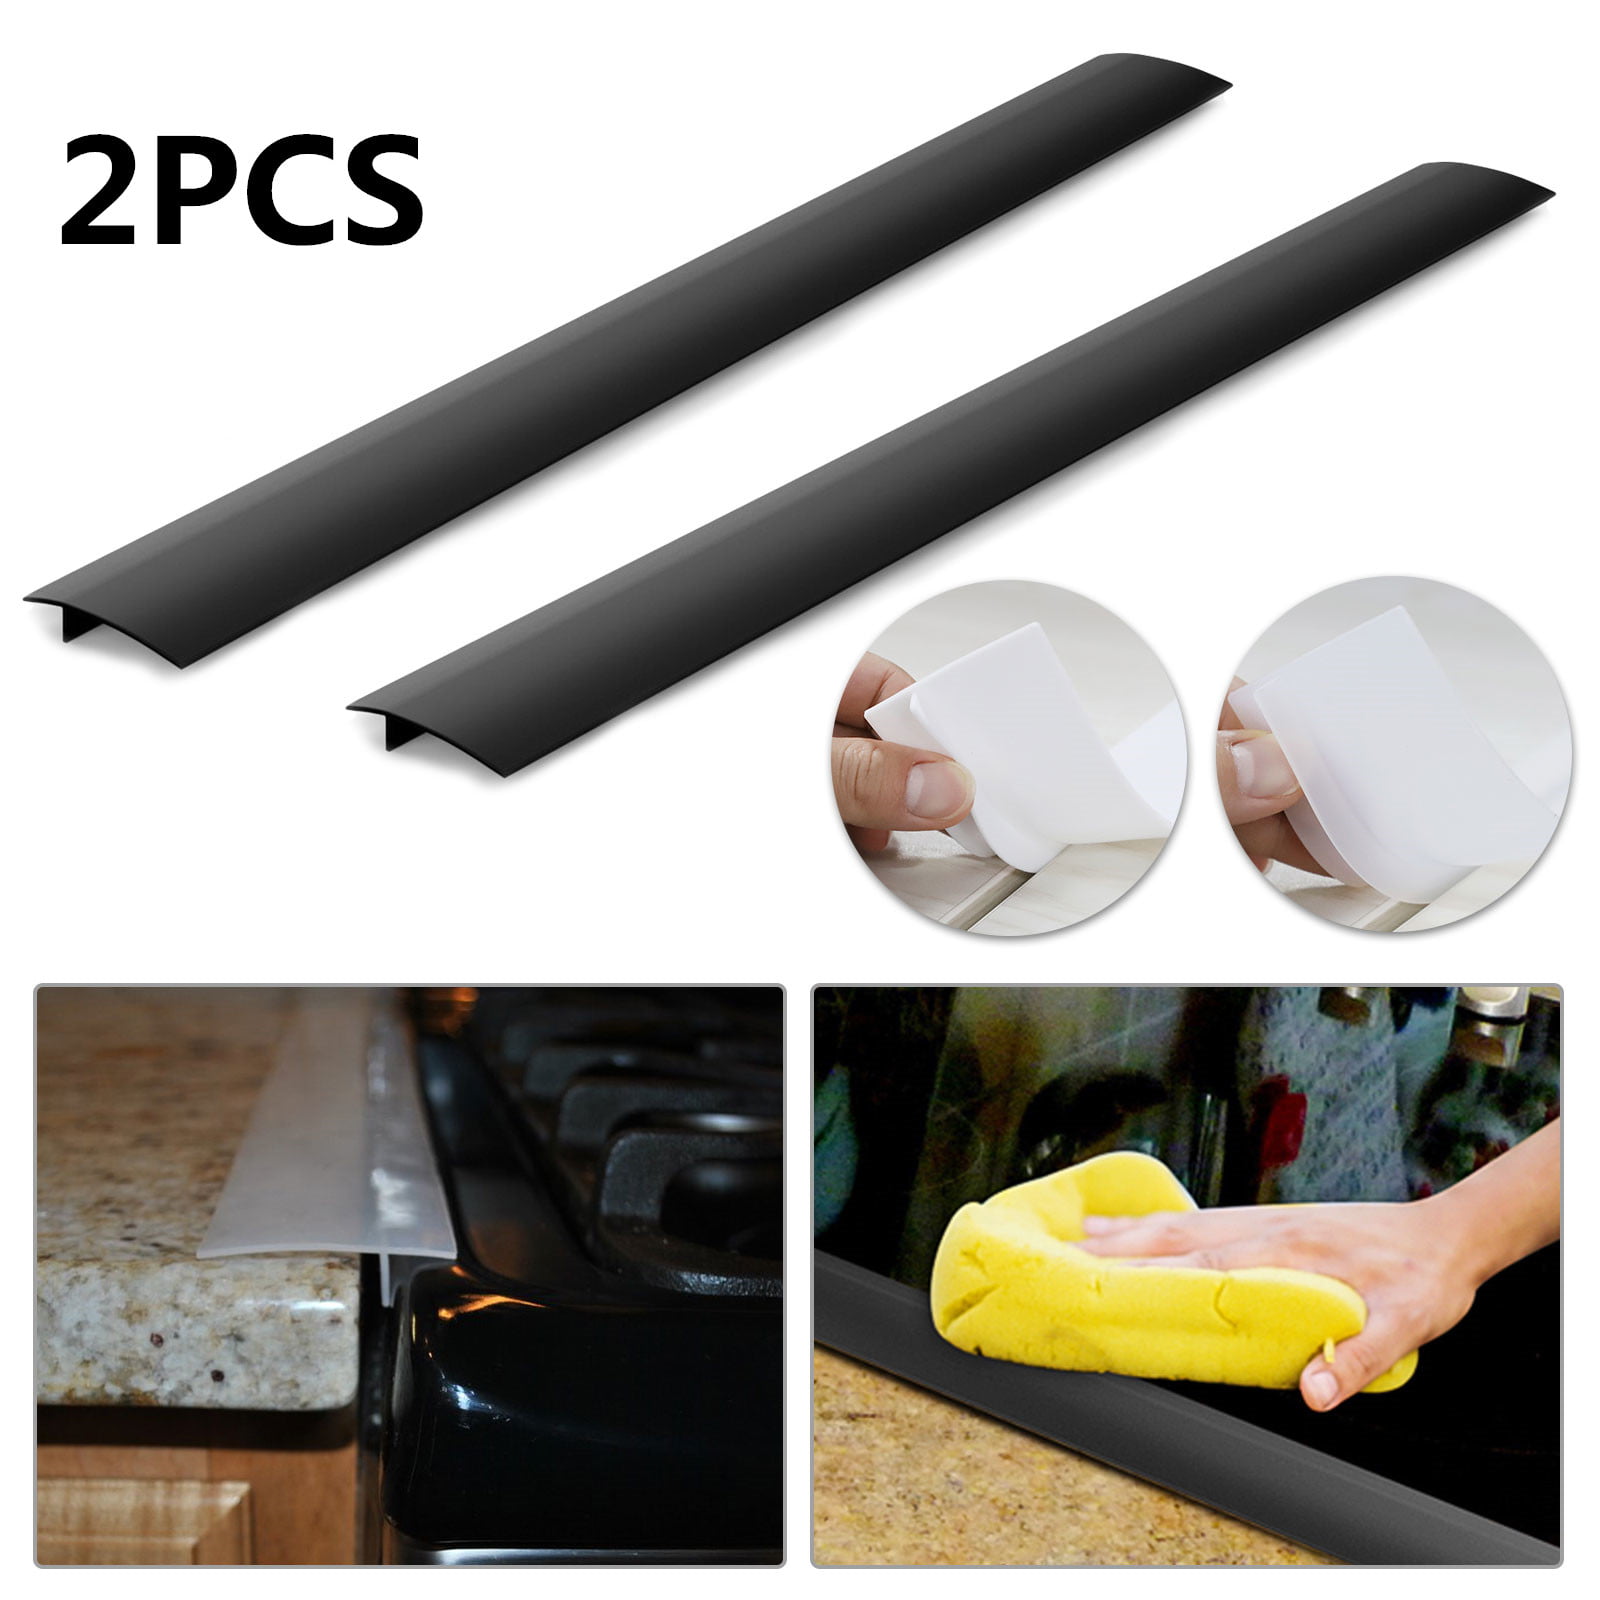 Cyleibe 2 Pcs Kitchen Silicone Stove Counter Gap Cover， Heat Resistant Long Gap Filler Spill Bits Seal Strip for Cooker Washer Dryer Work Surface Stovetop 21inch-Black 